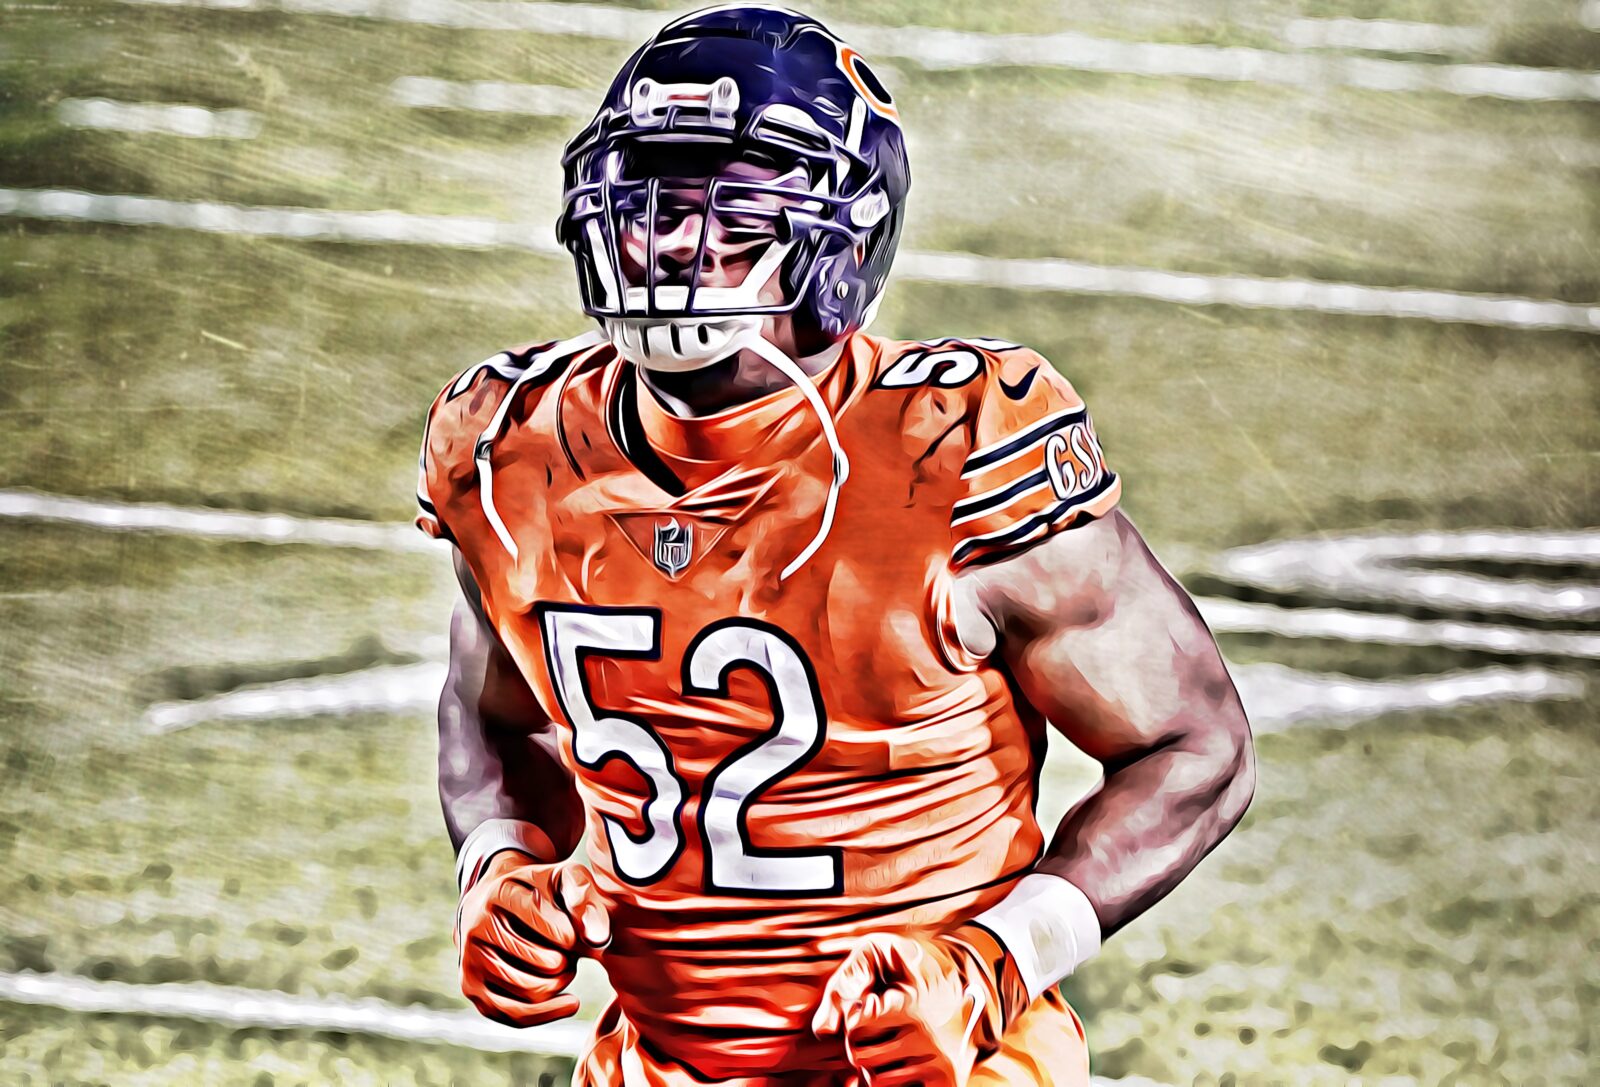 The Khalil Mack Trade Single-handedly Swung the NFC North - The Ringer